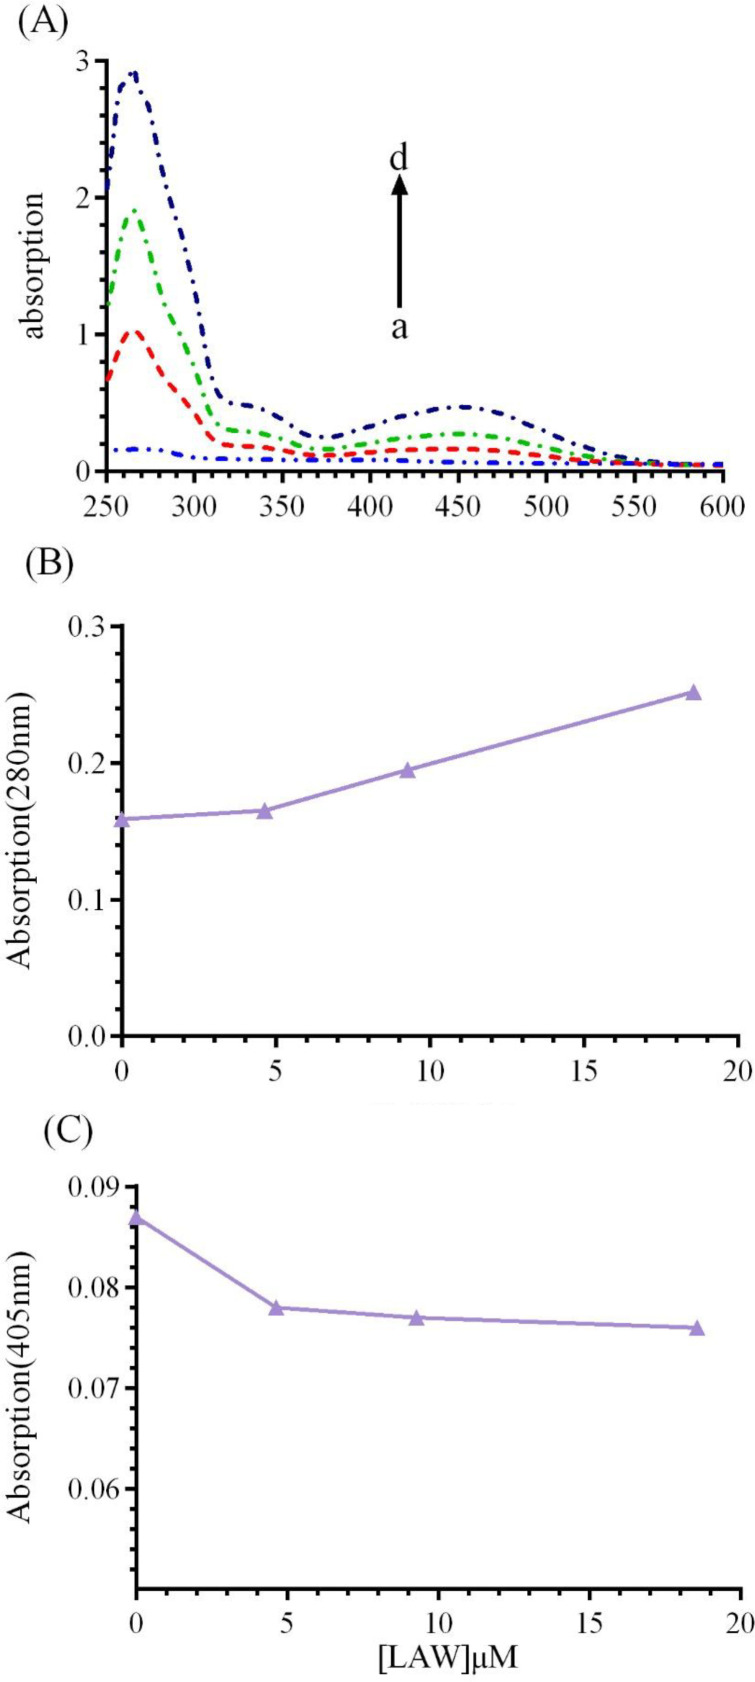 (A) UV-vis spectra of BCL (1μM) in the absence or presence of different concentrations of LAW; (a) 0, (b) 4.6, (c) 9.3 and (d) 18.6 µM in 50 mM phosphate buffer, pH 7, at 298 k, (B) LAW increases the absorption intensity of BLC at 280 nm, (C) LAW decreases the absorption intensity of BLC at 405 nm